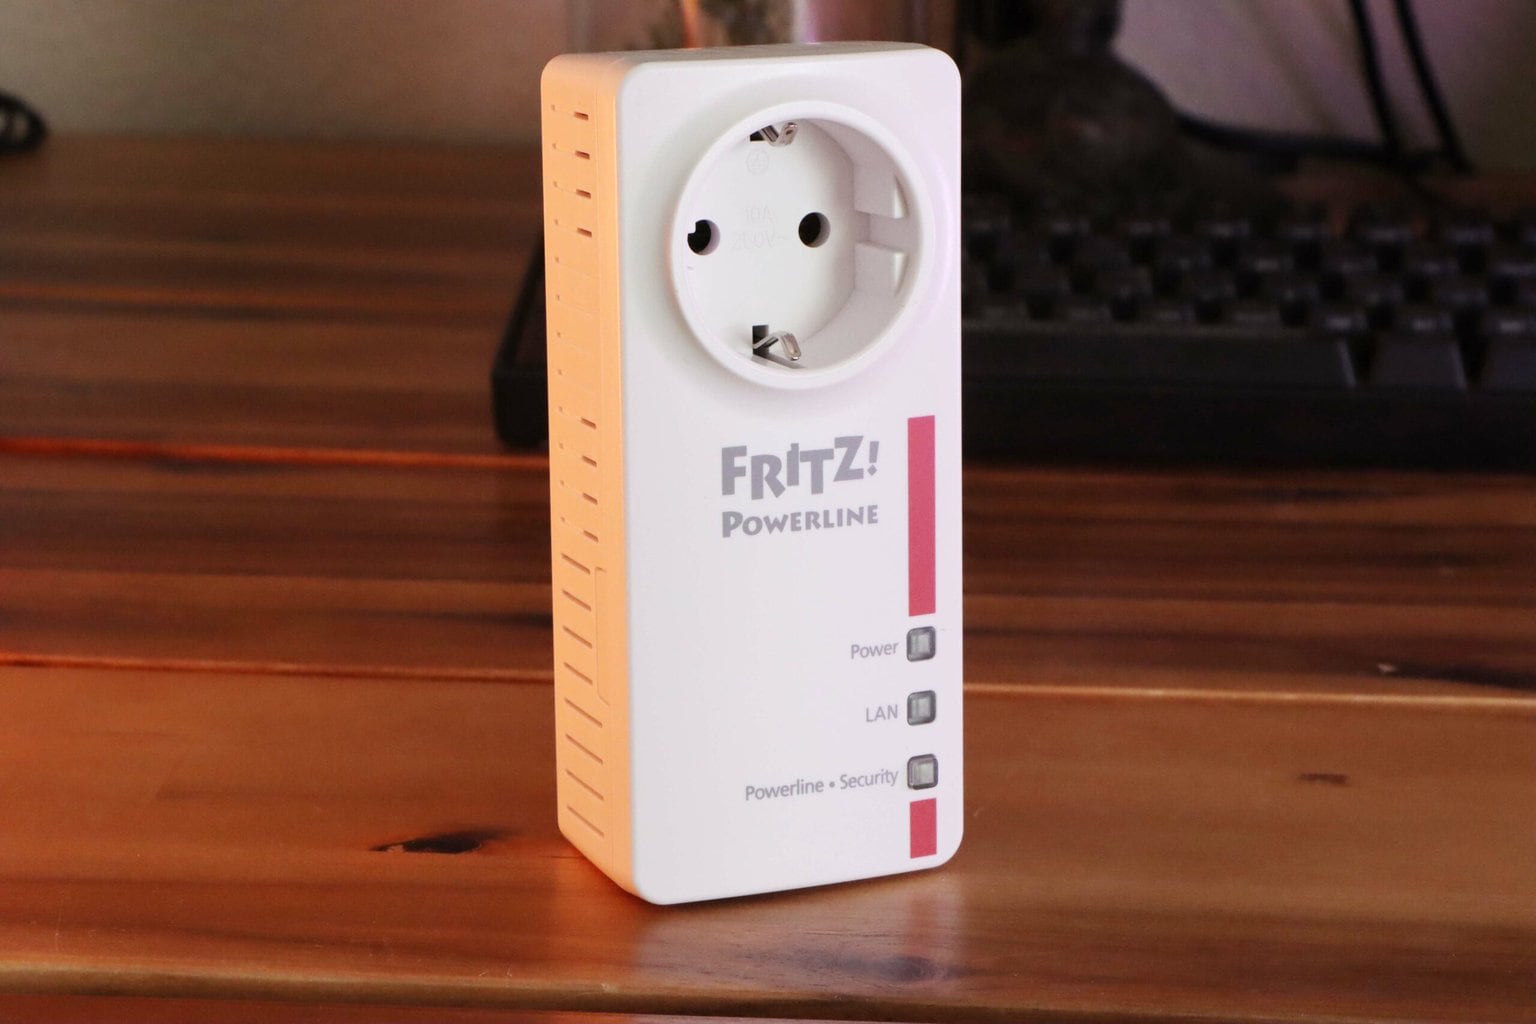 y unboxing - review Game 1260E, Powerline Fritz! It AVM